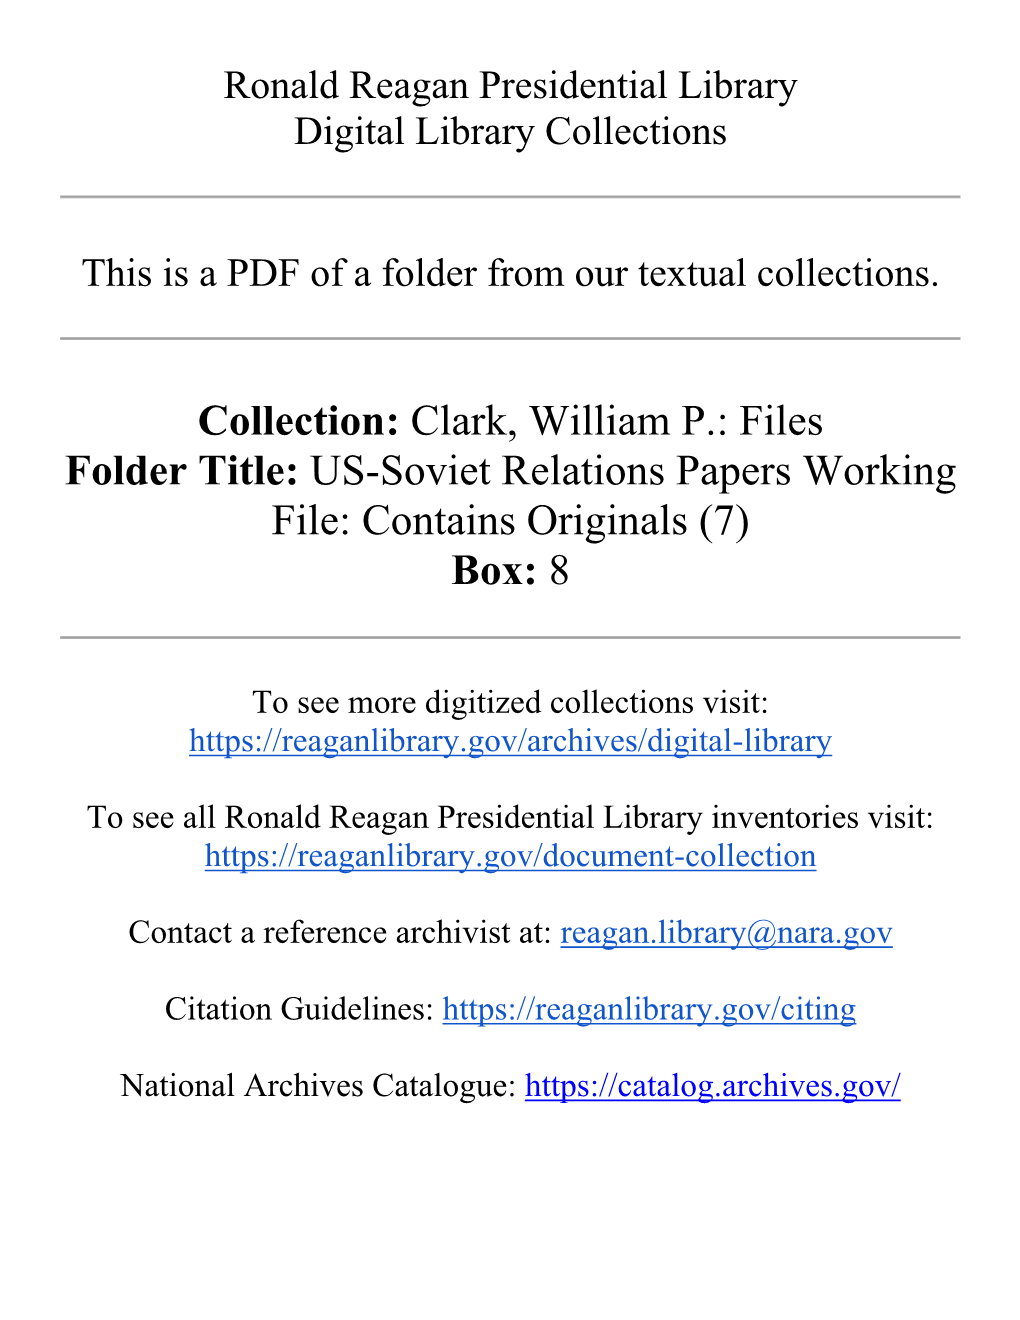 Clark, William P.: Files Folder Title: US-Soviet Relations Papers Working File: Contains Originals (7) Box: 8